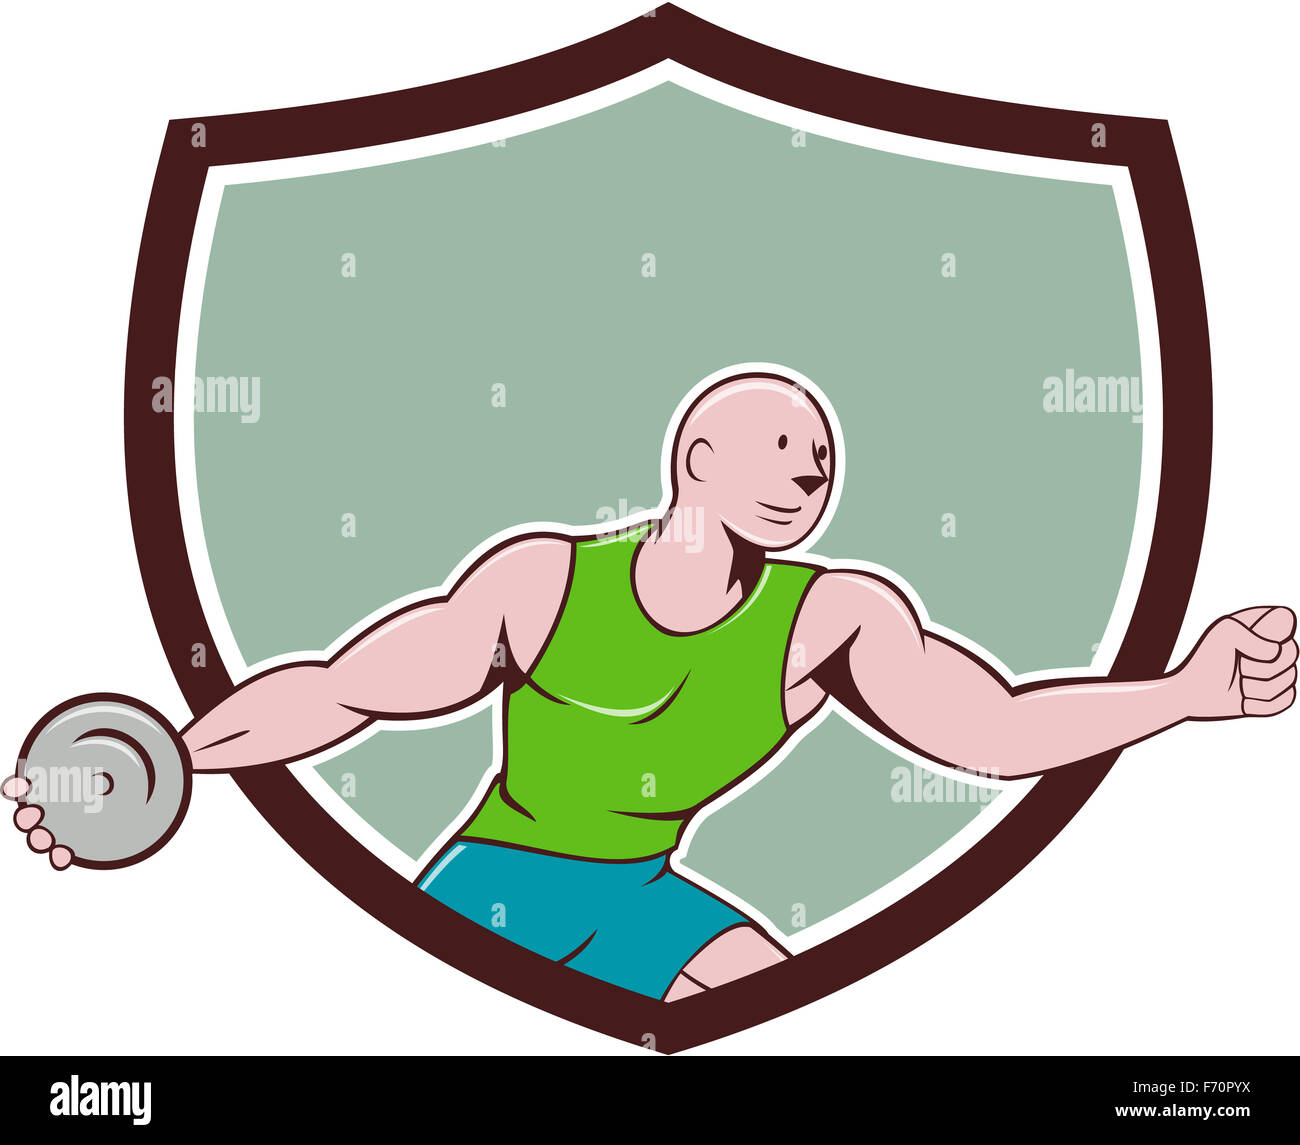 Illustration of a discus thrower viewed from the side set inside shield crest on isolated background done in cartoon style. Stock Photo